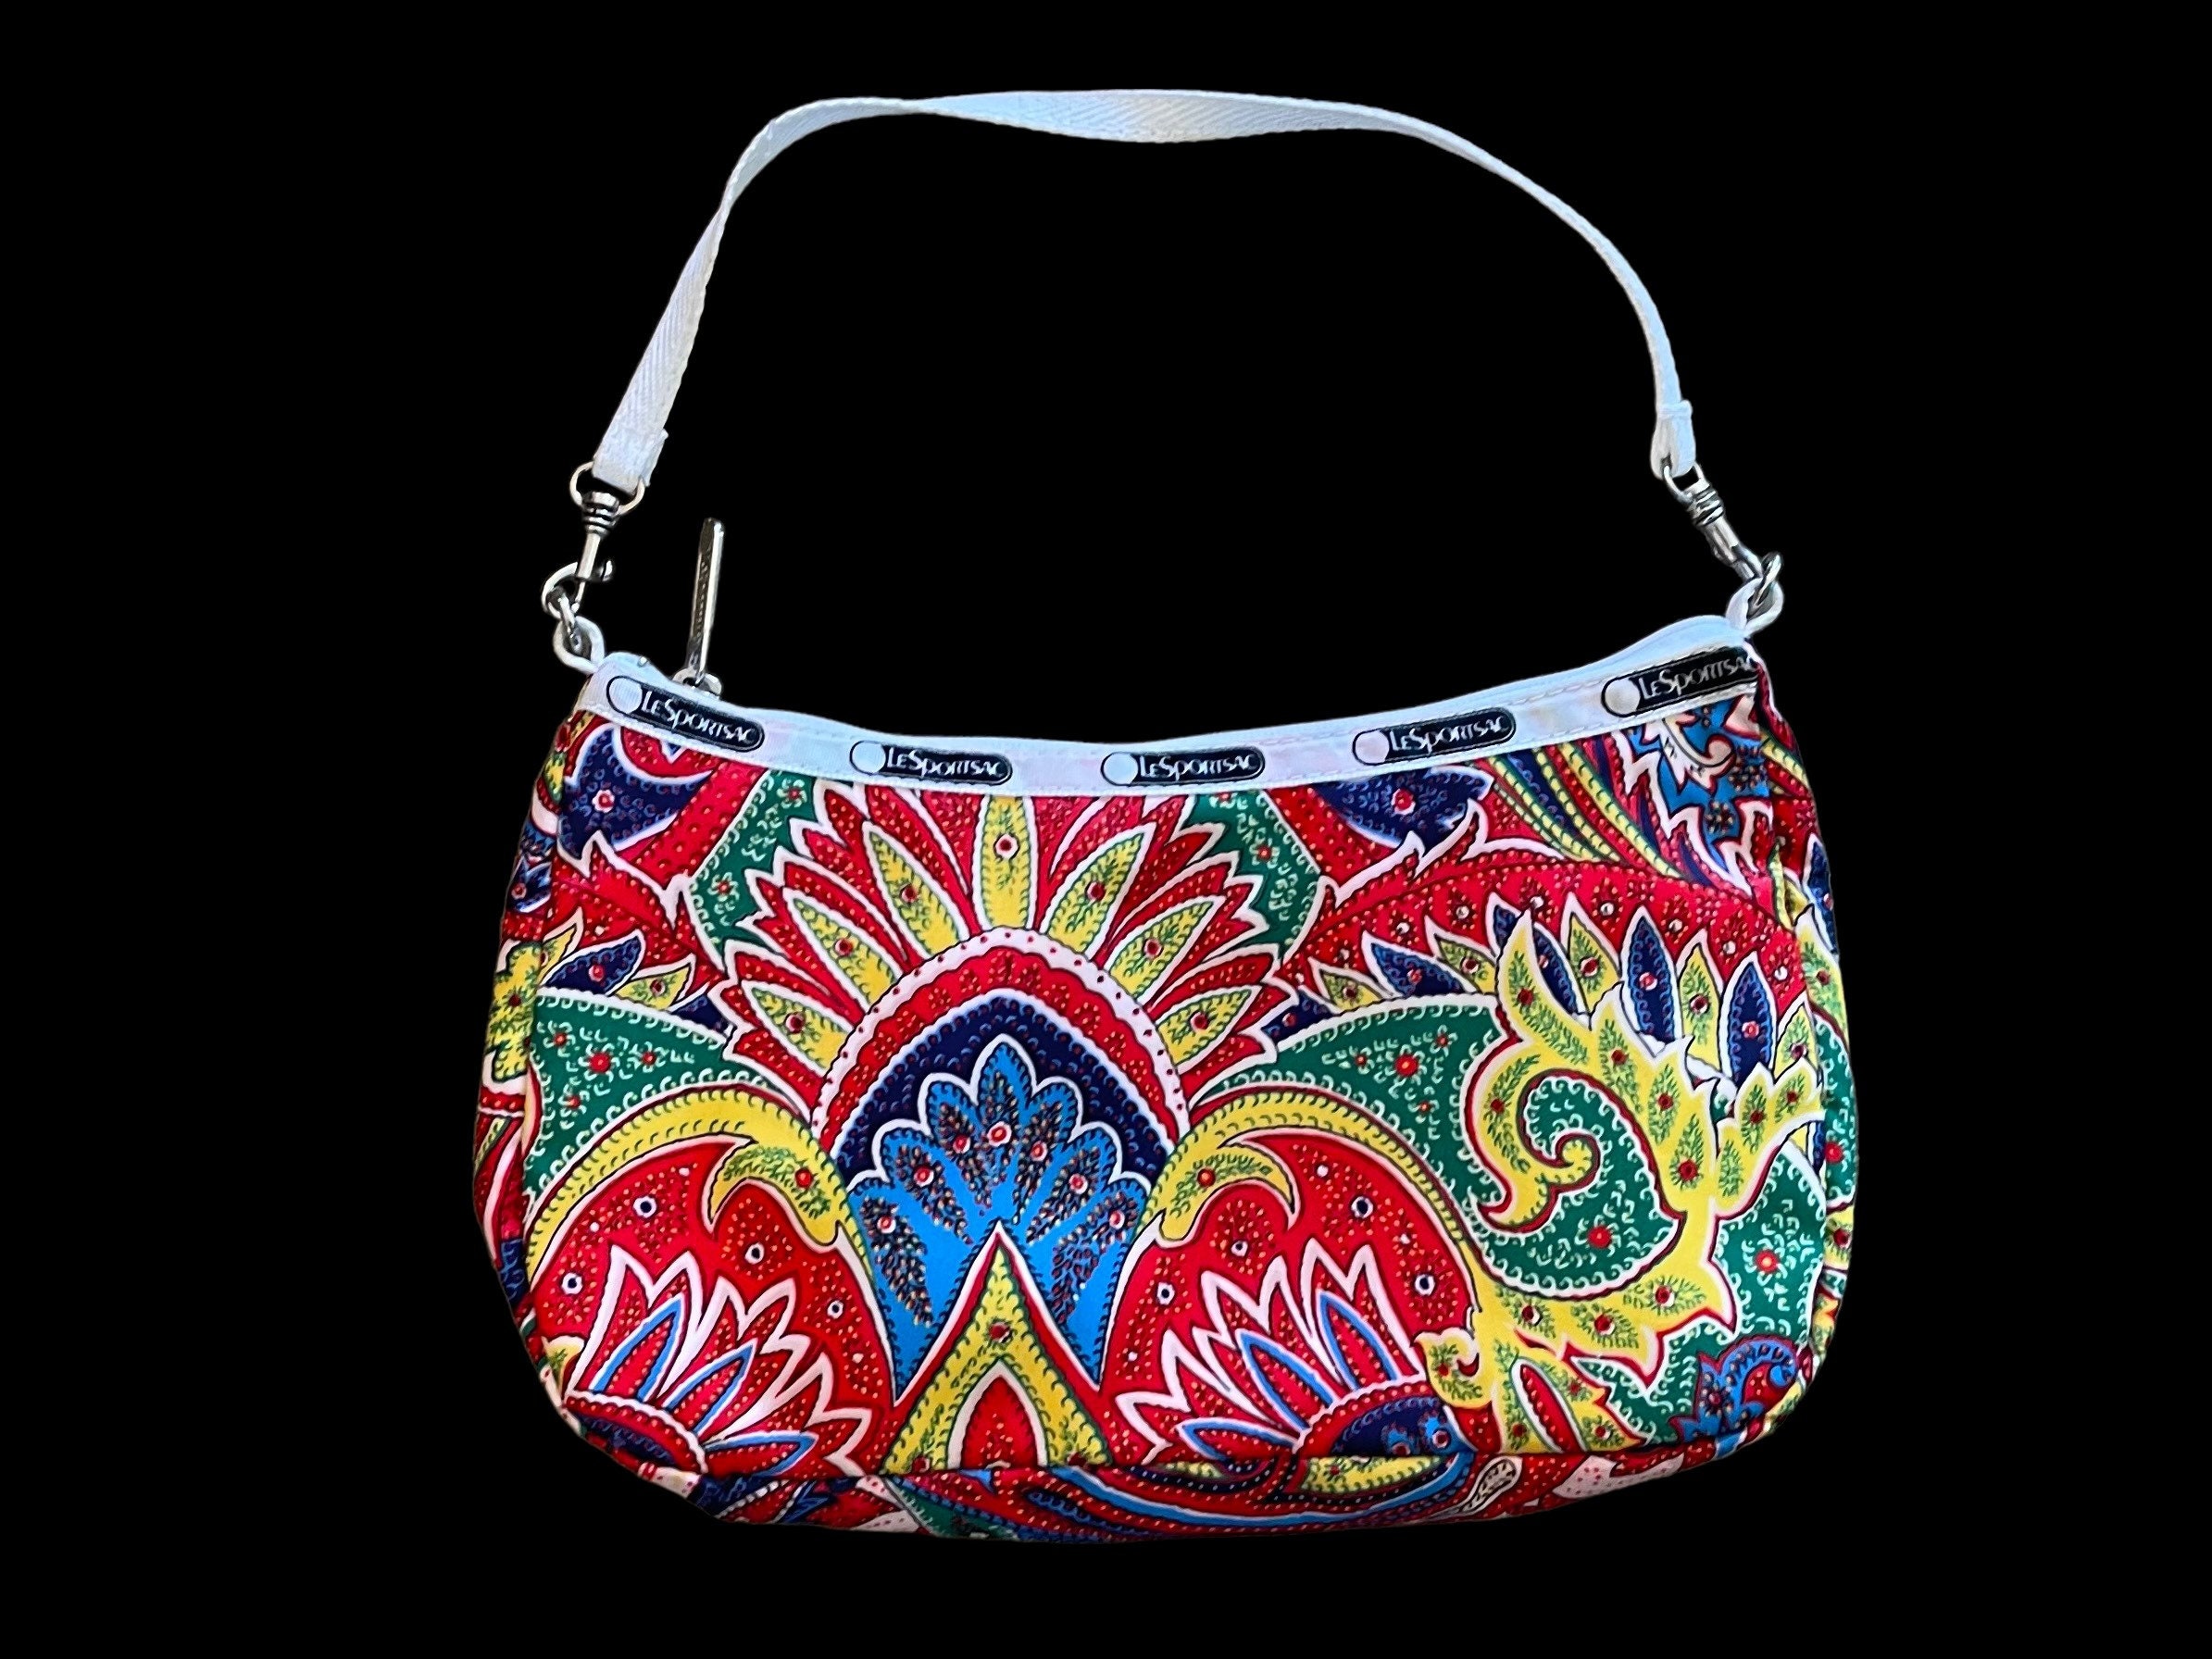 Flipping vintage Lesportsac bags is a favorite sport of mine!lol if th